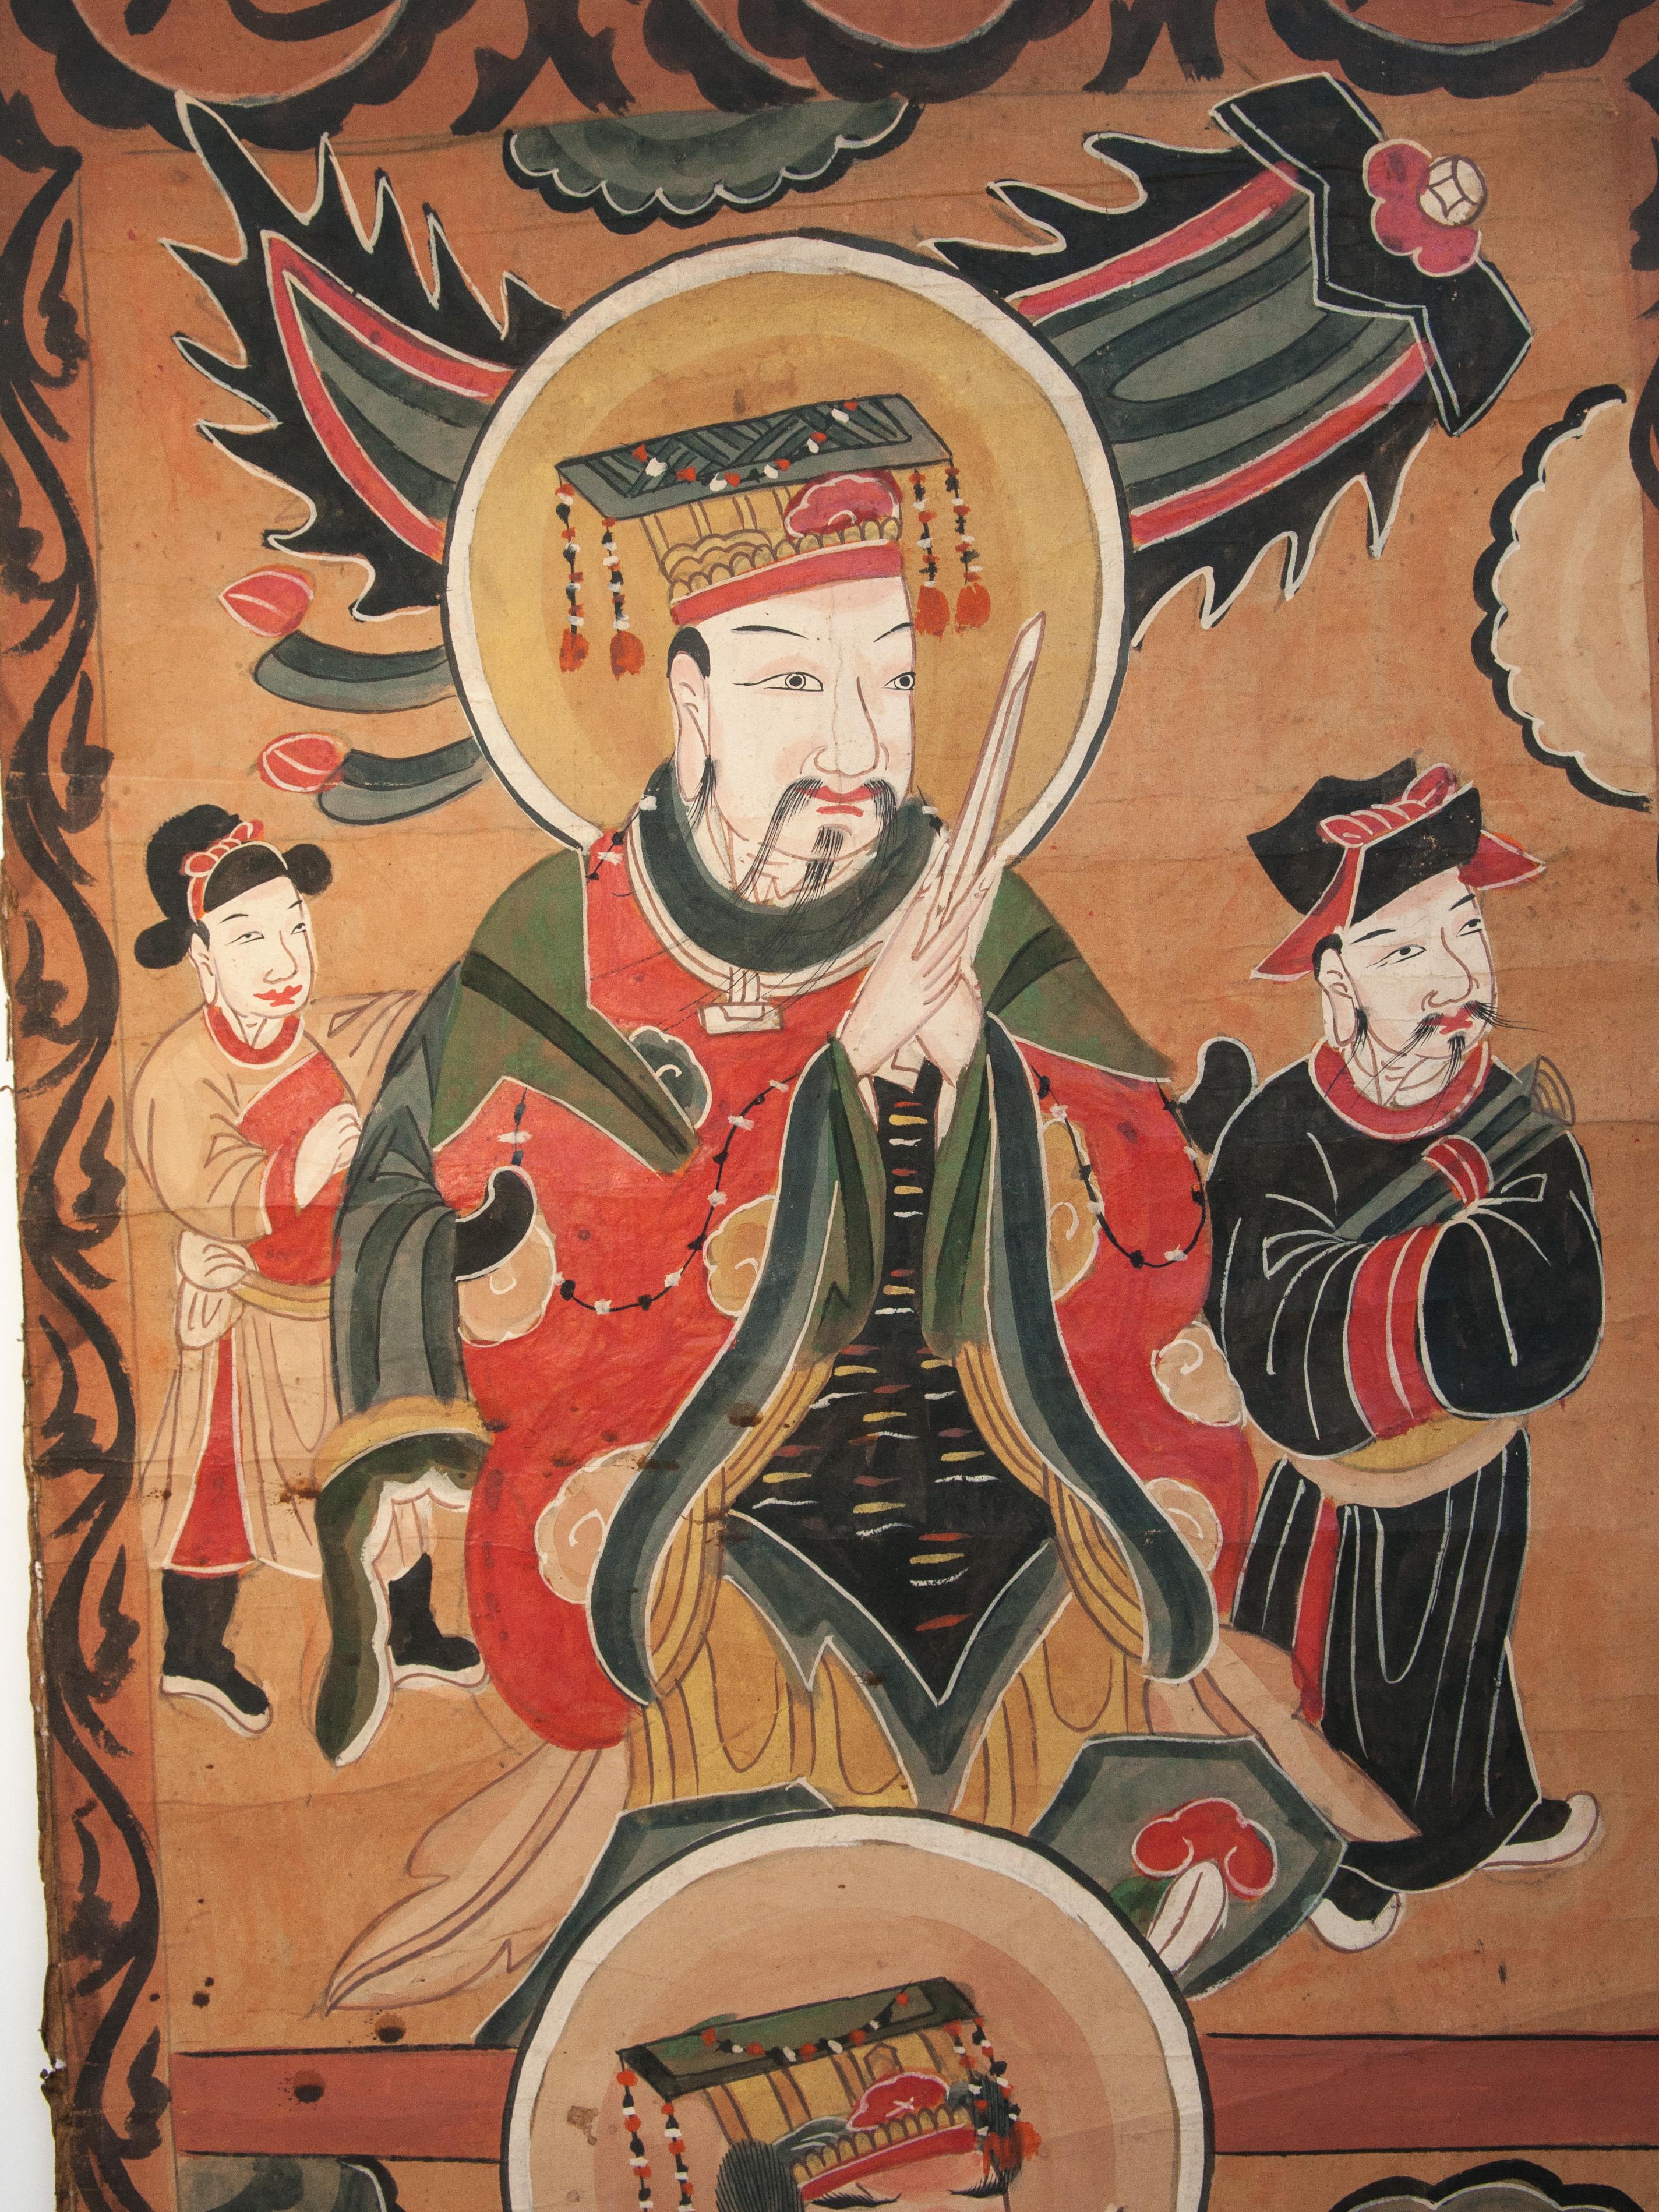 Yao Ceremonial Painting. Yang Kin and Sui Fo, The Governors of the World and the Waters. Guizhou Province, China, early to mid-19th century.
(Please note that the painting is not mounted or framed.)
This painting would have been one in a set of